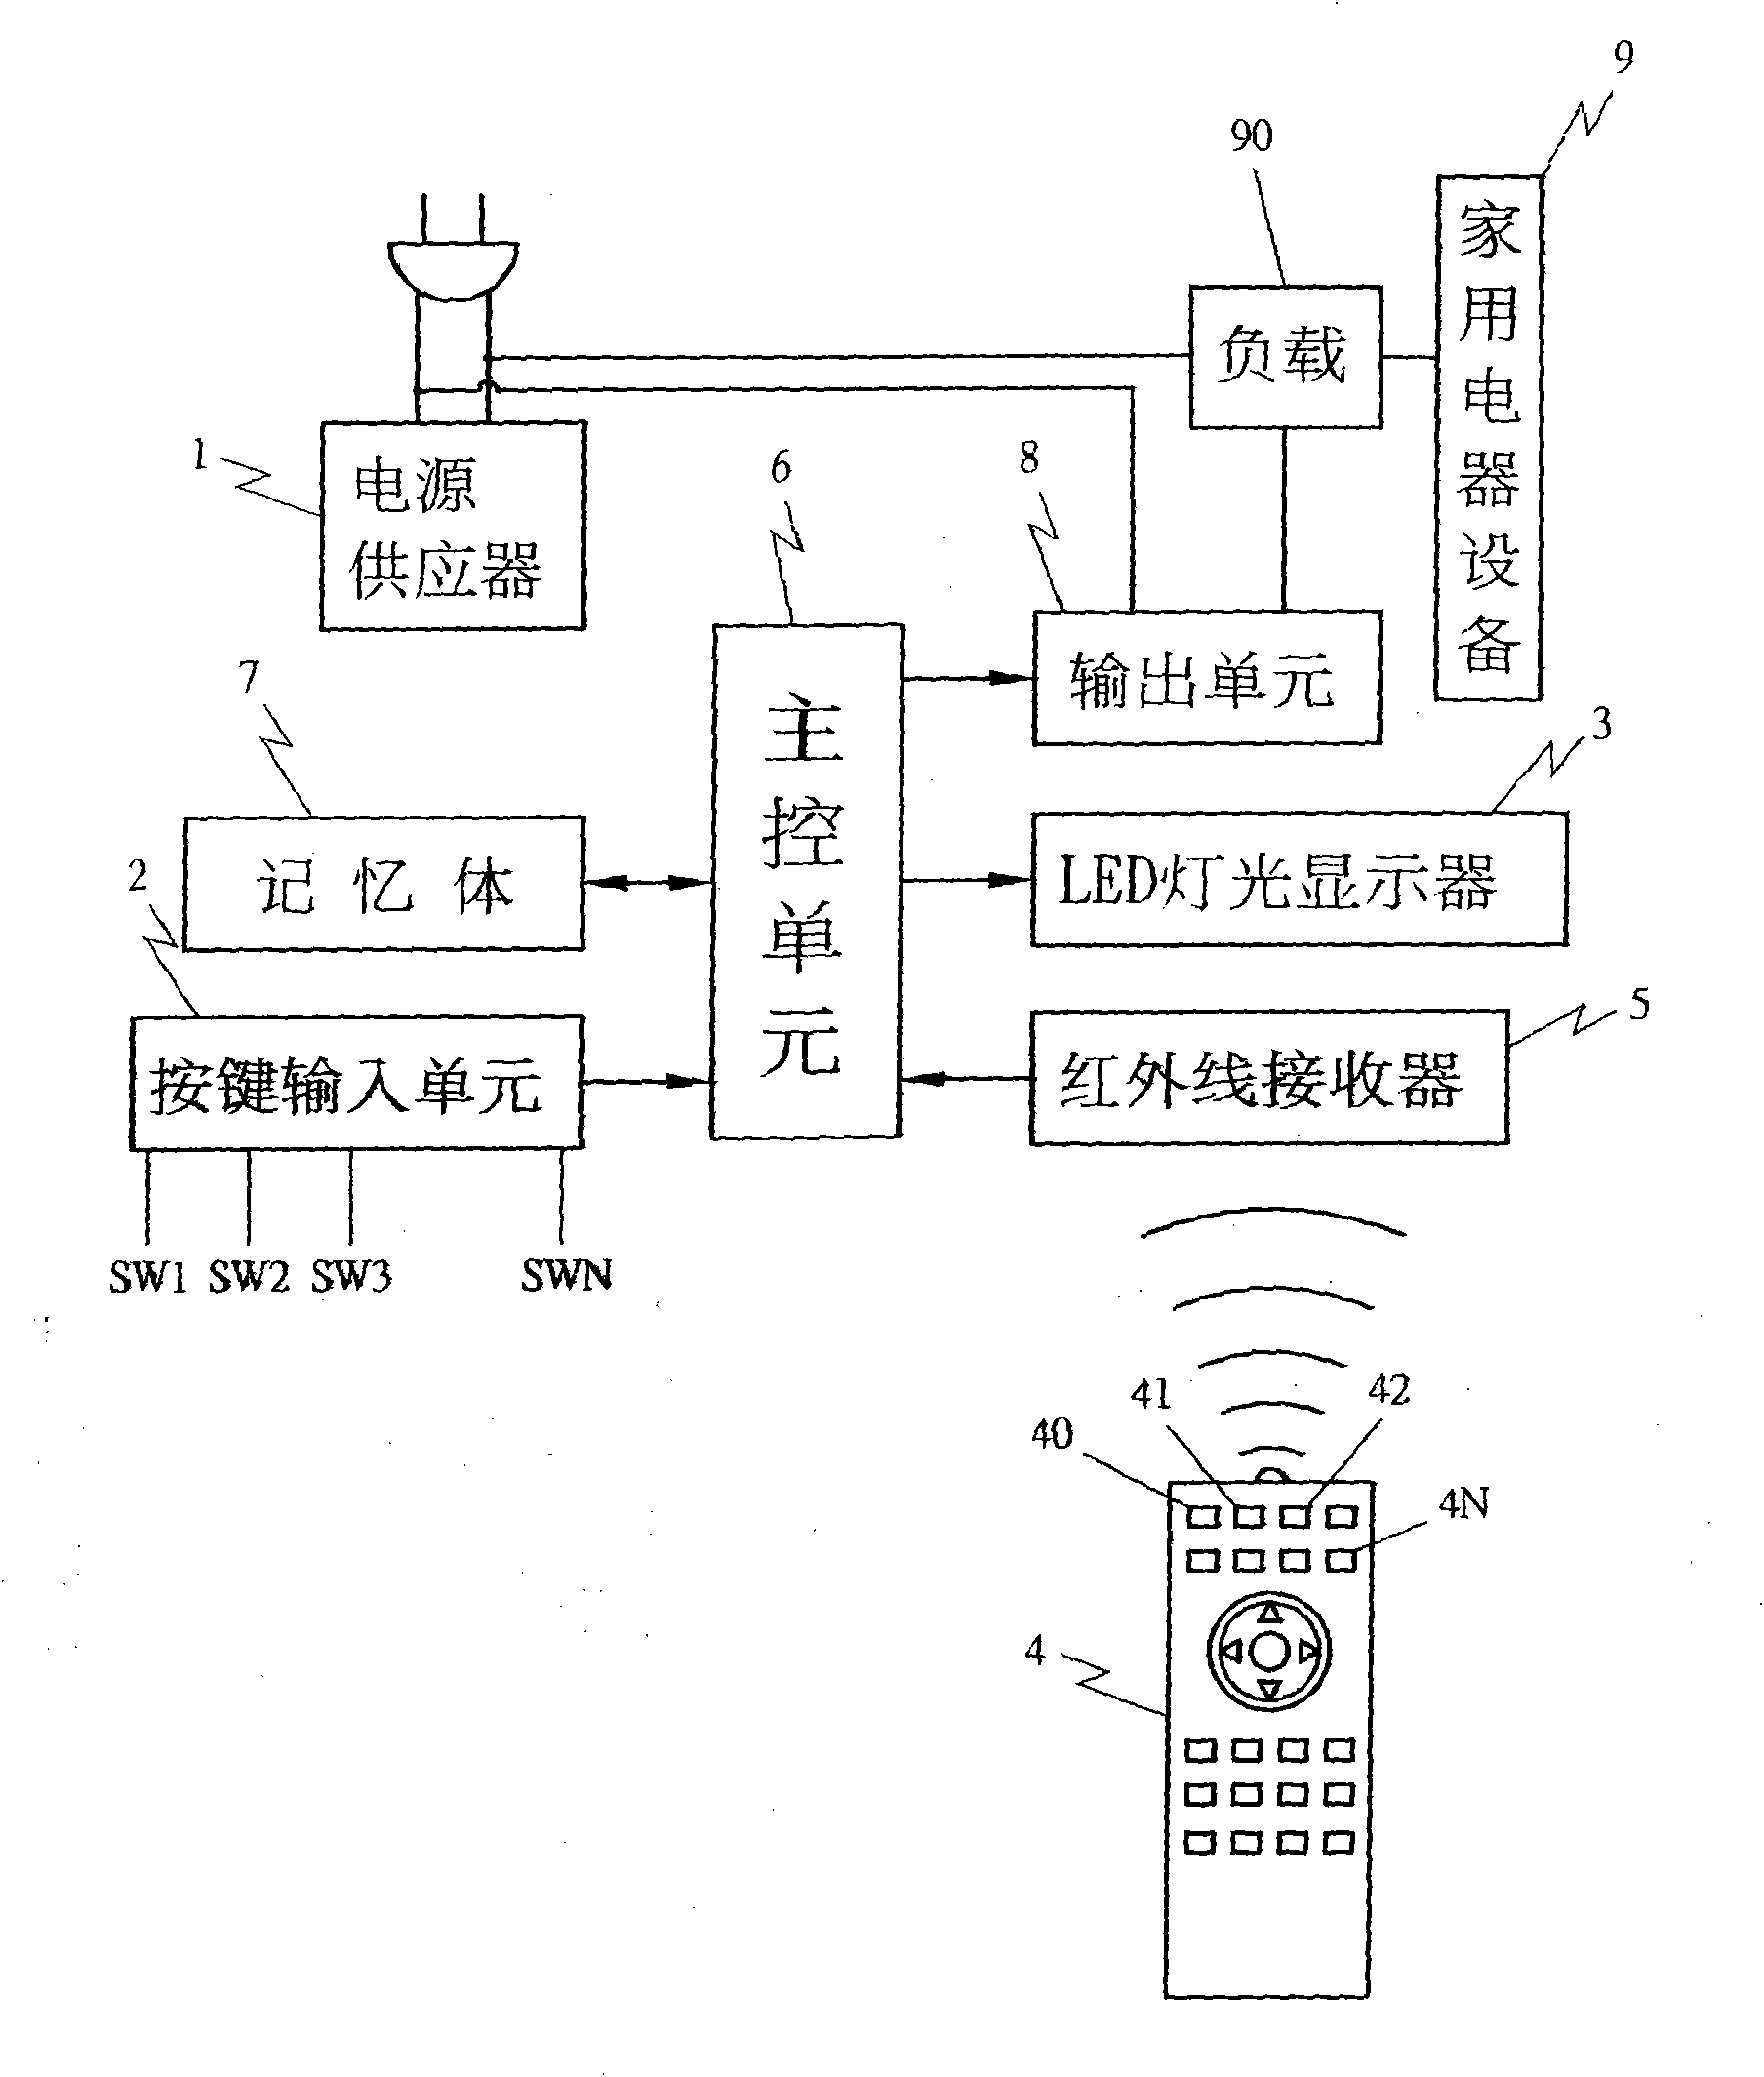 Remote control system of household appliance equipment